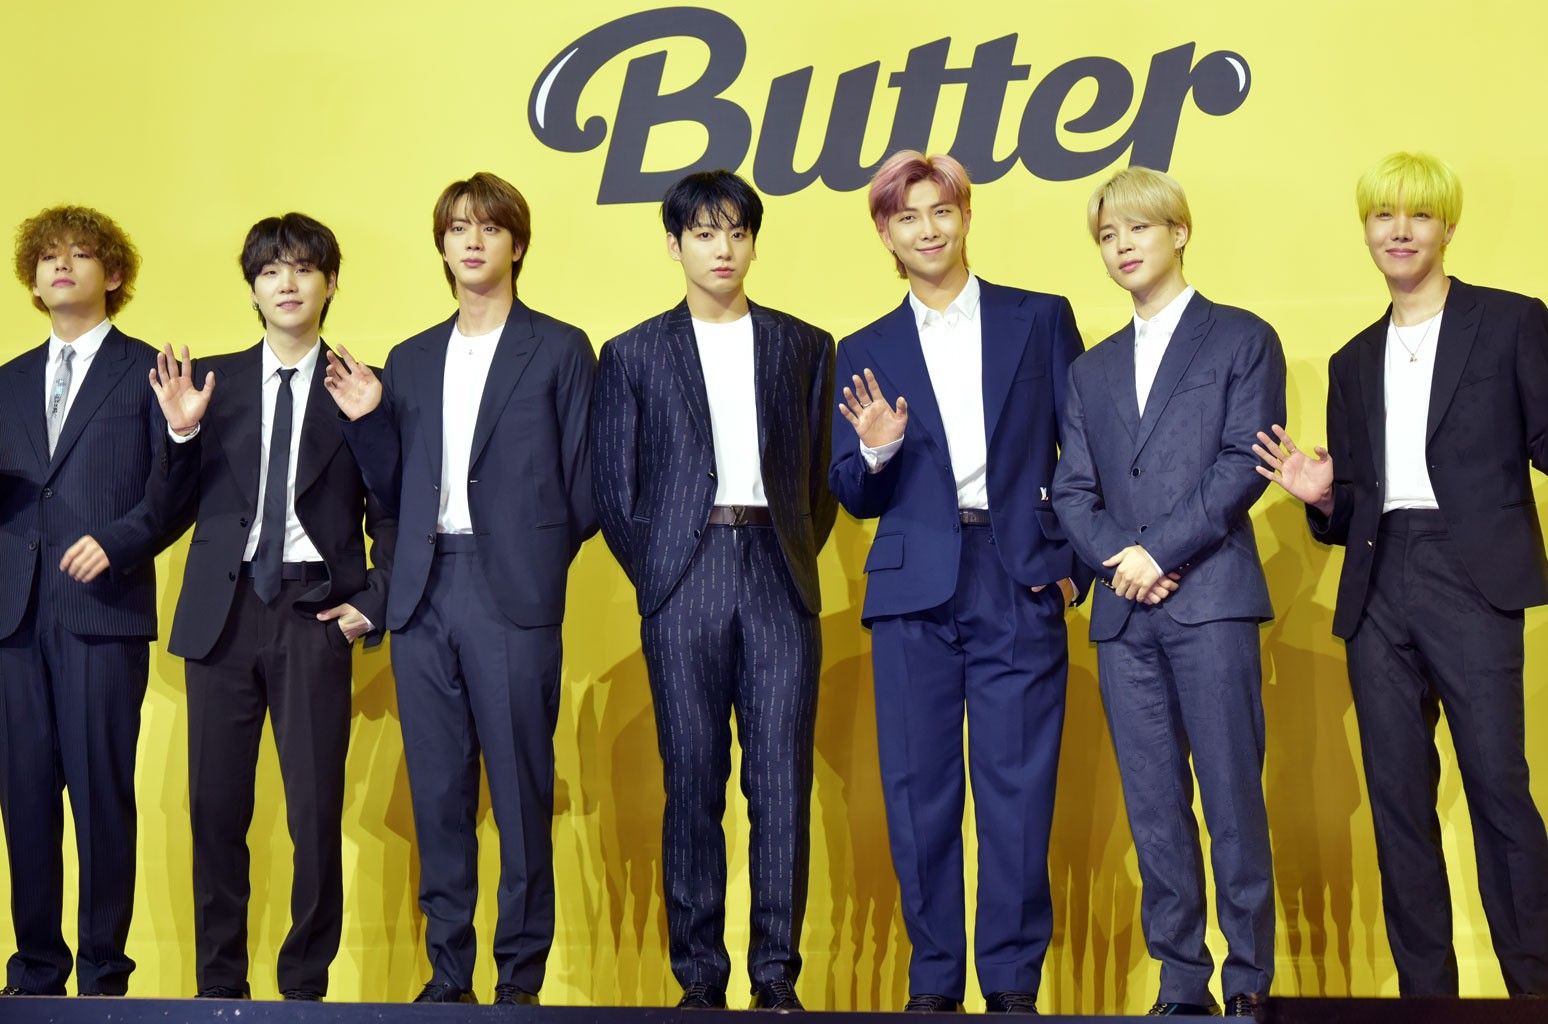 BTS Announces New Track on 'Butter' CD Single